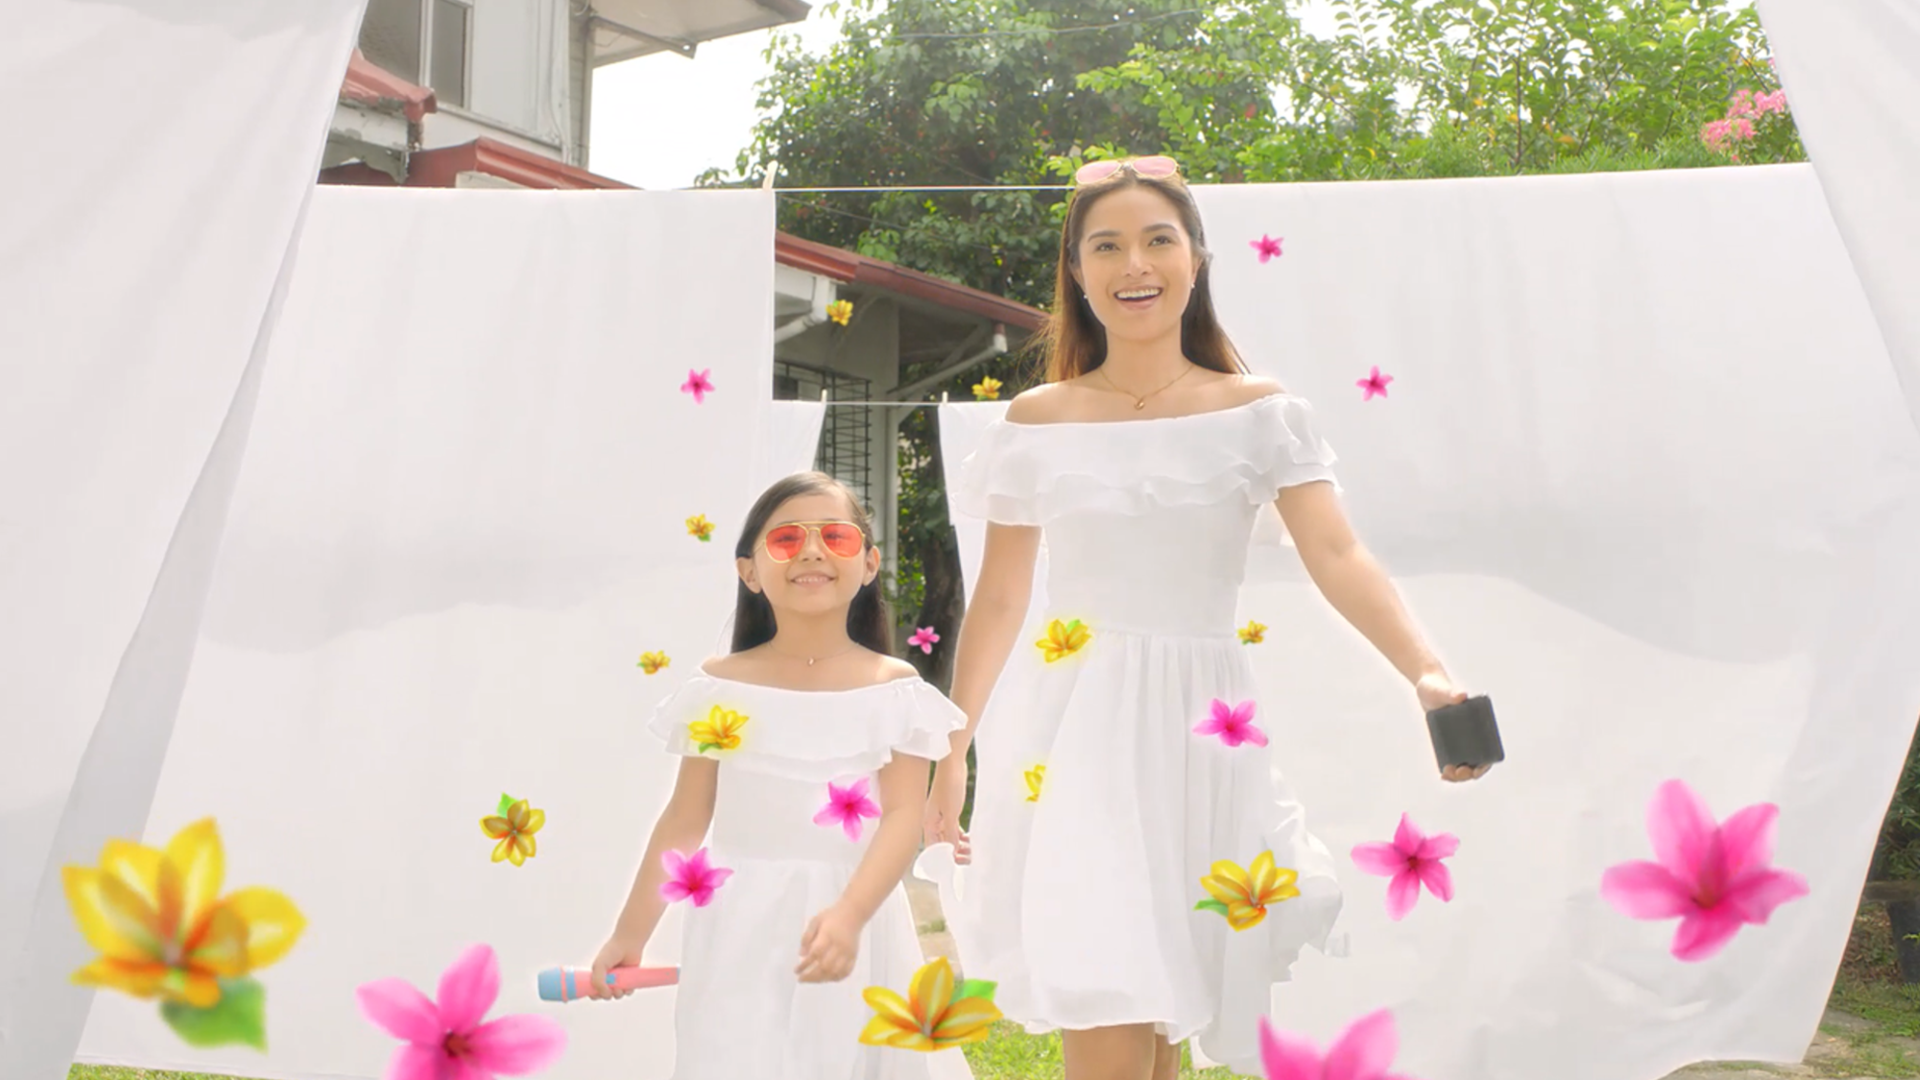 Mother and daughter outdoors, wearing white dress